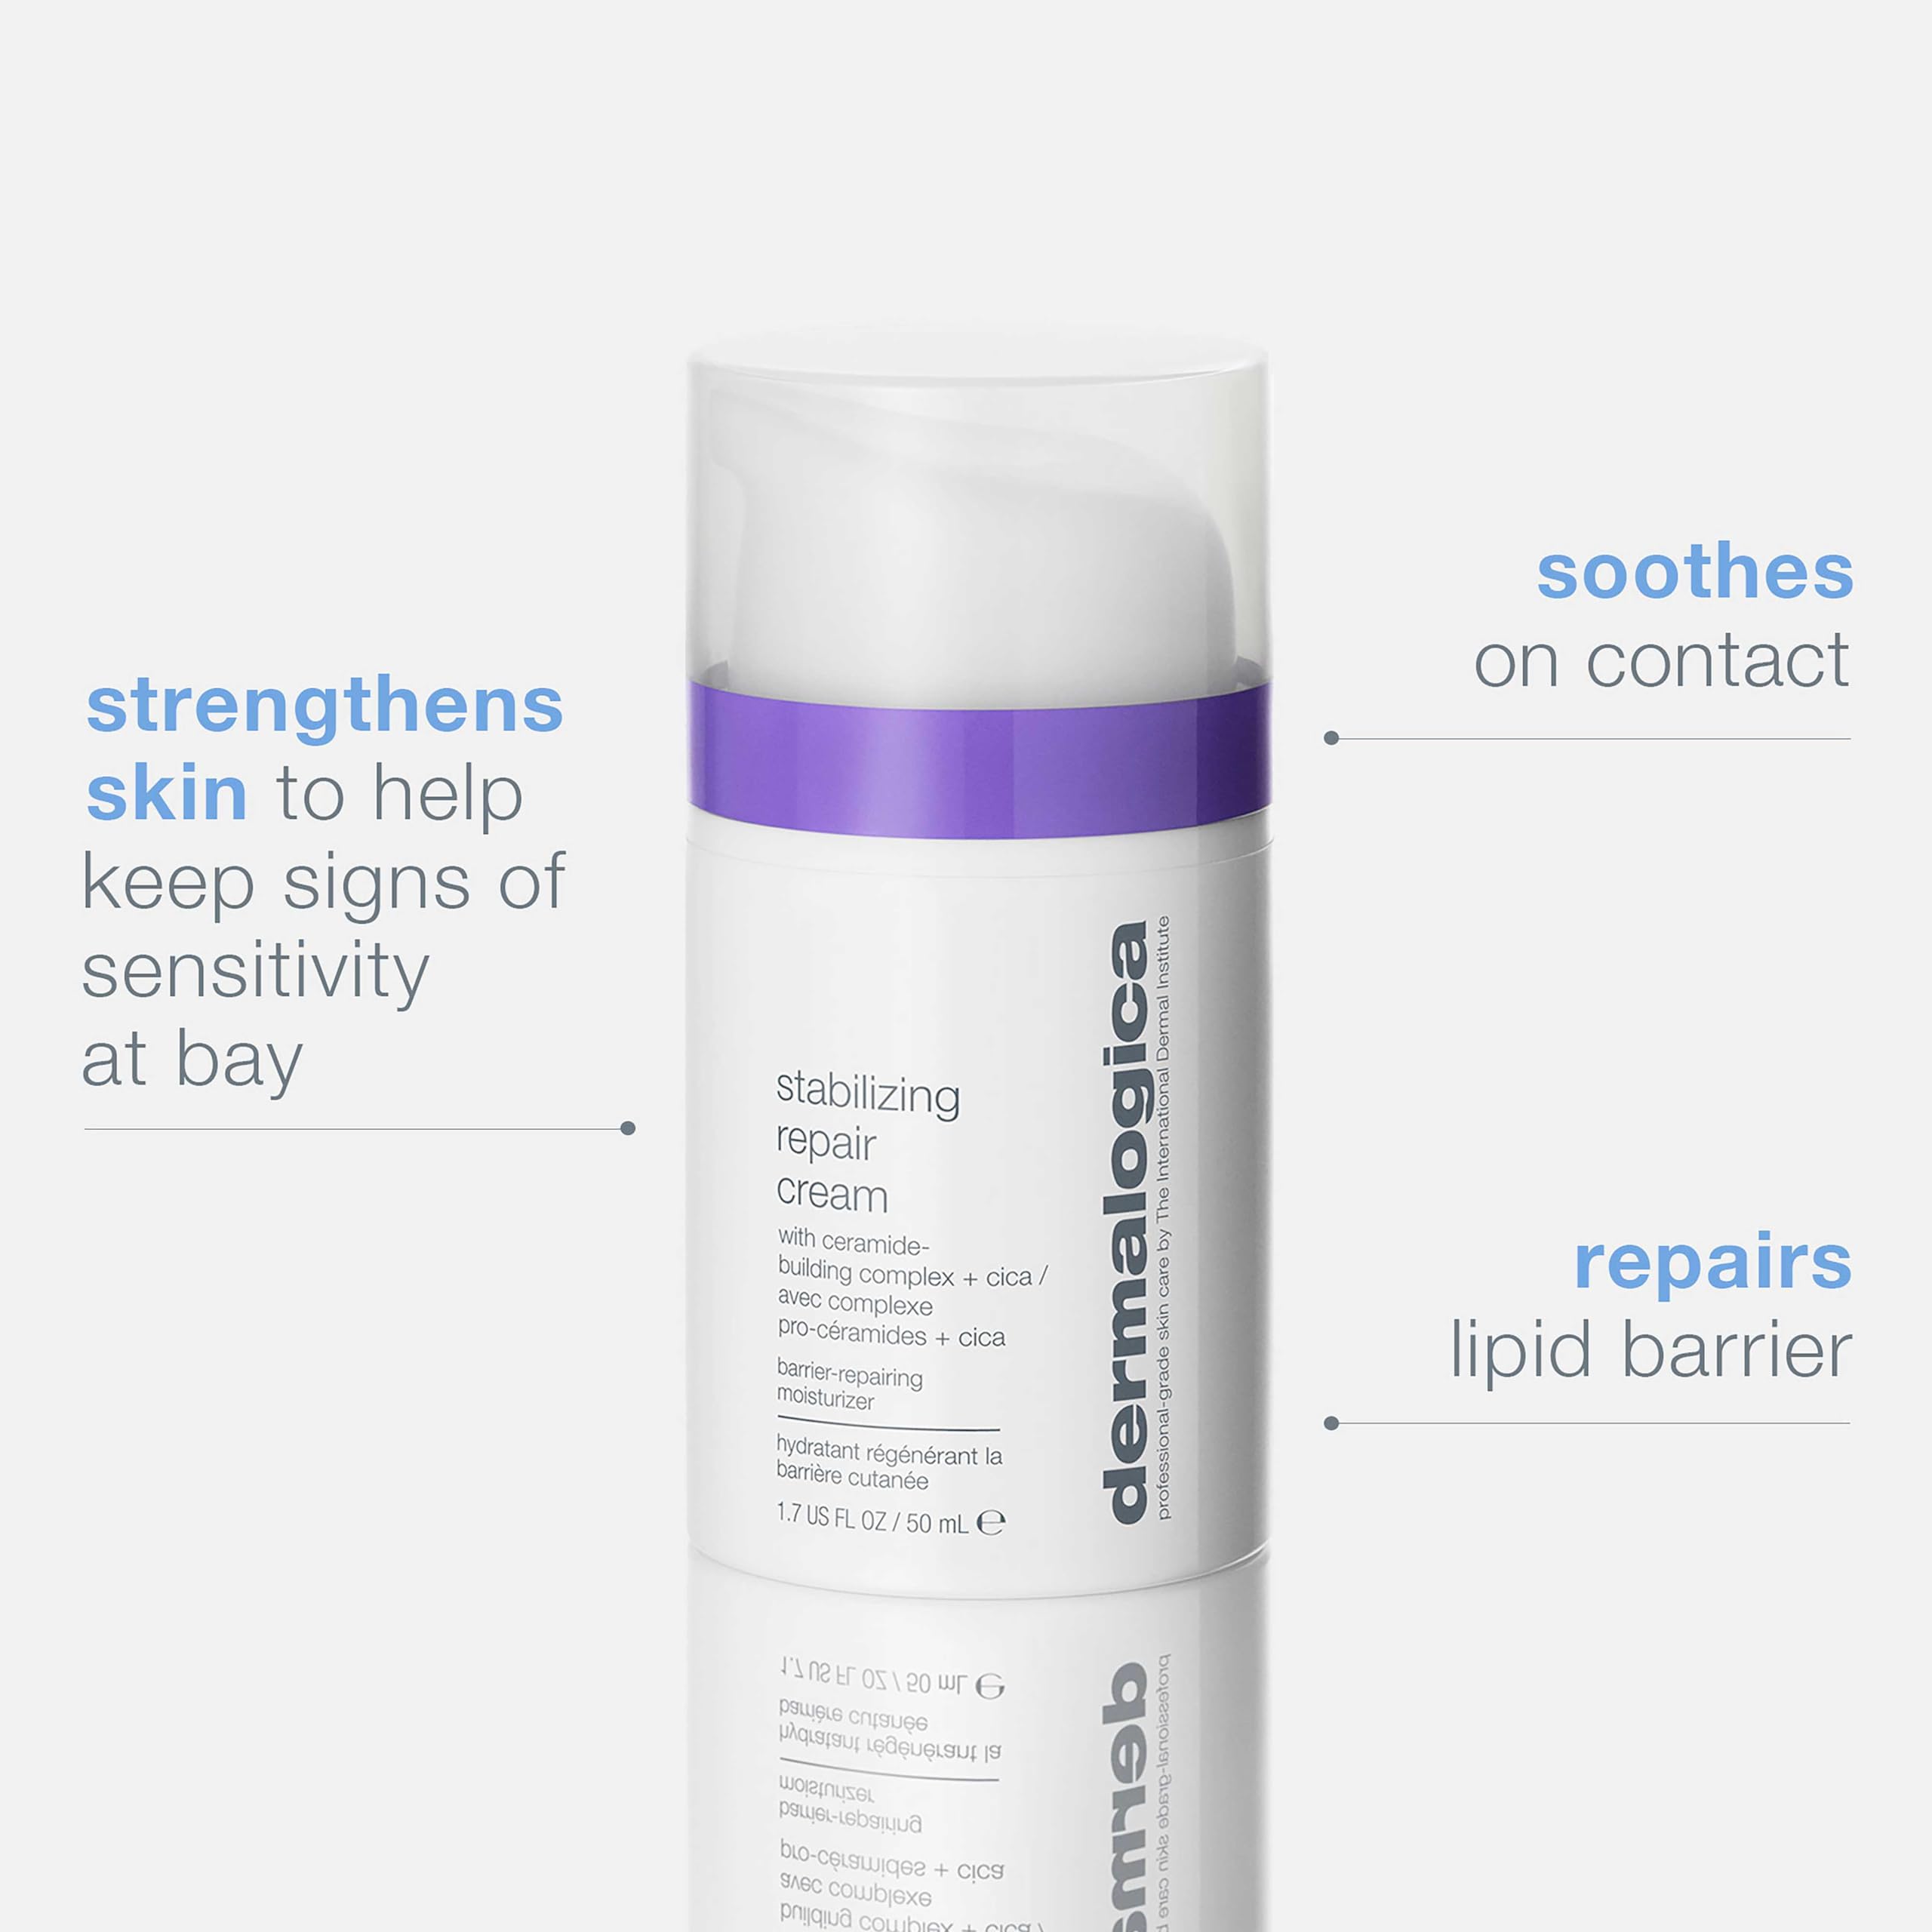 Dermalogica Stabilizing Repair Cream, Face Moisturizer for Sensitive Skin with Cica - Strengthens, Soothes, and Repairs Skin Barrier, 1.7 fl oz